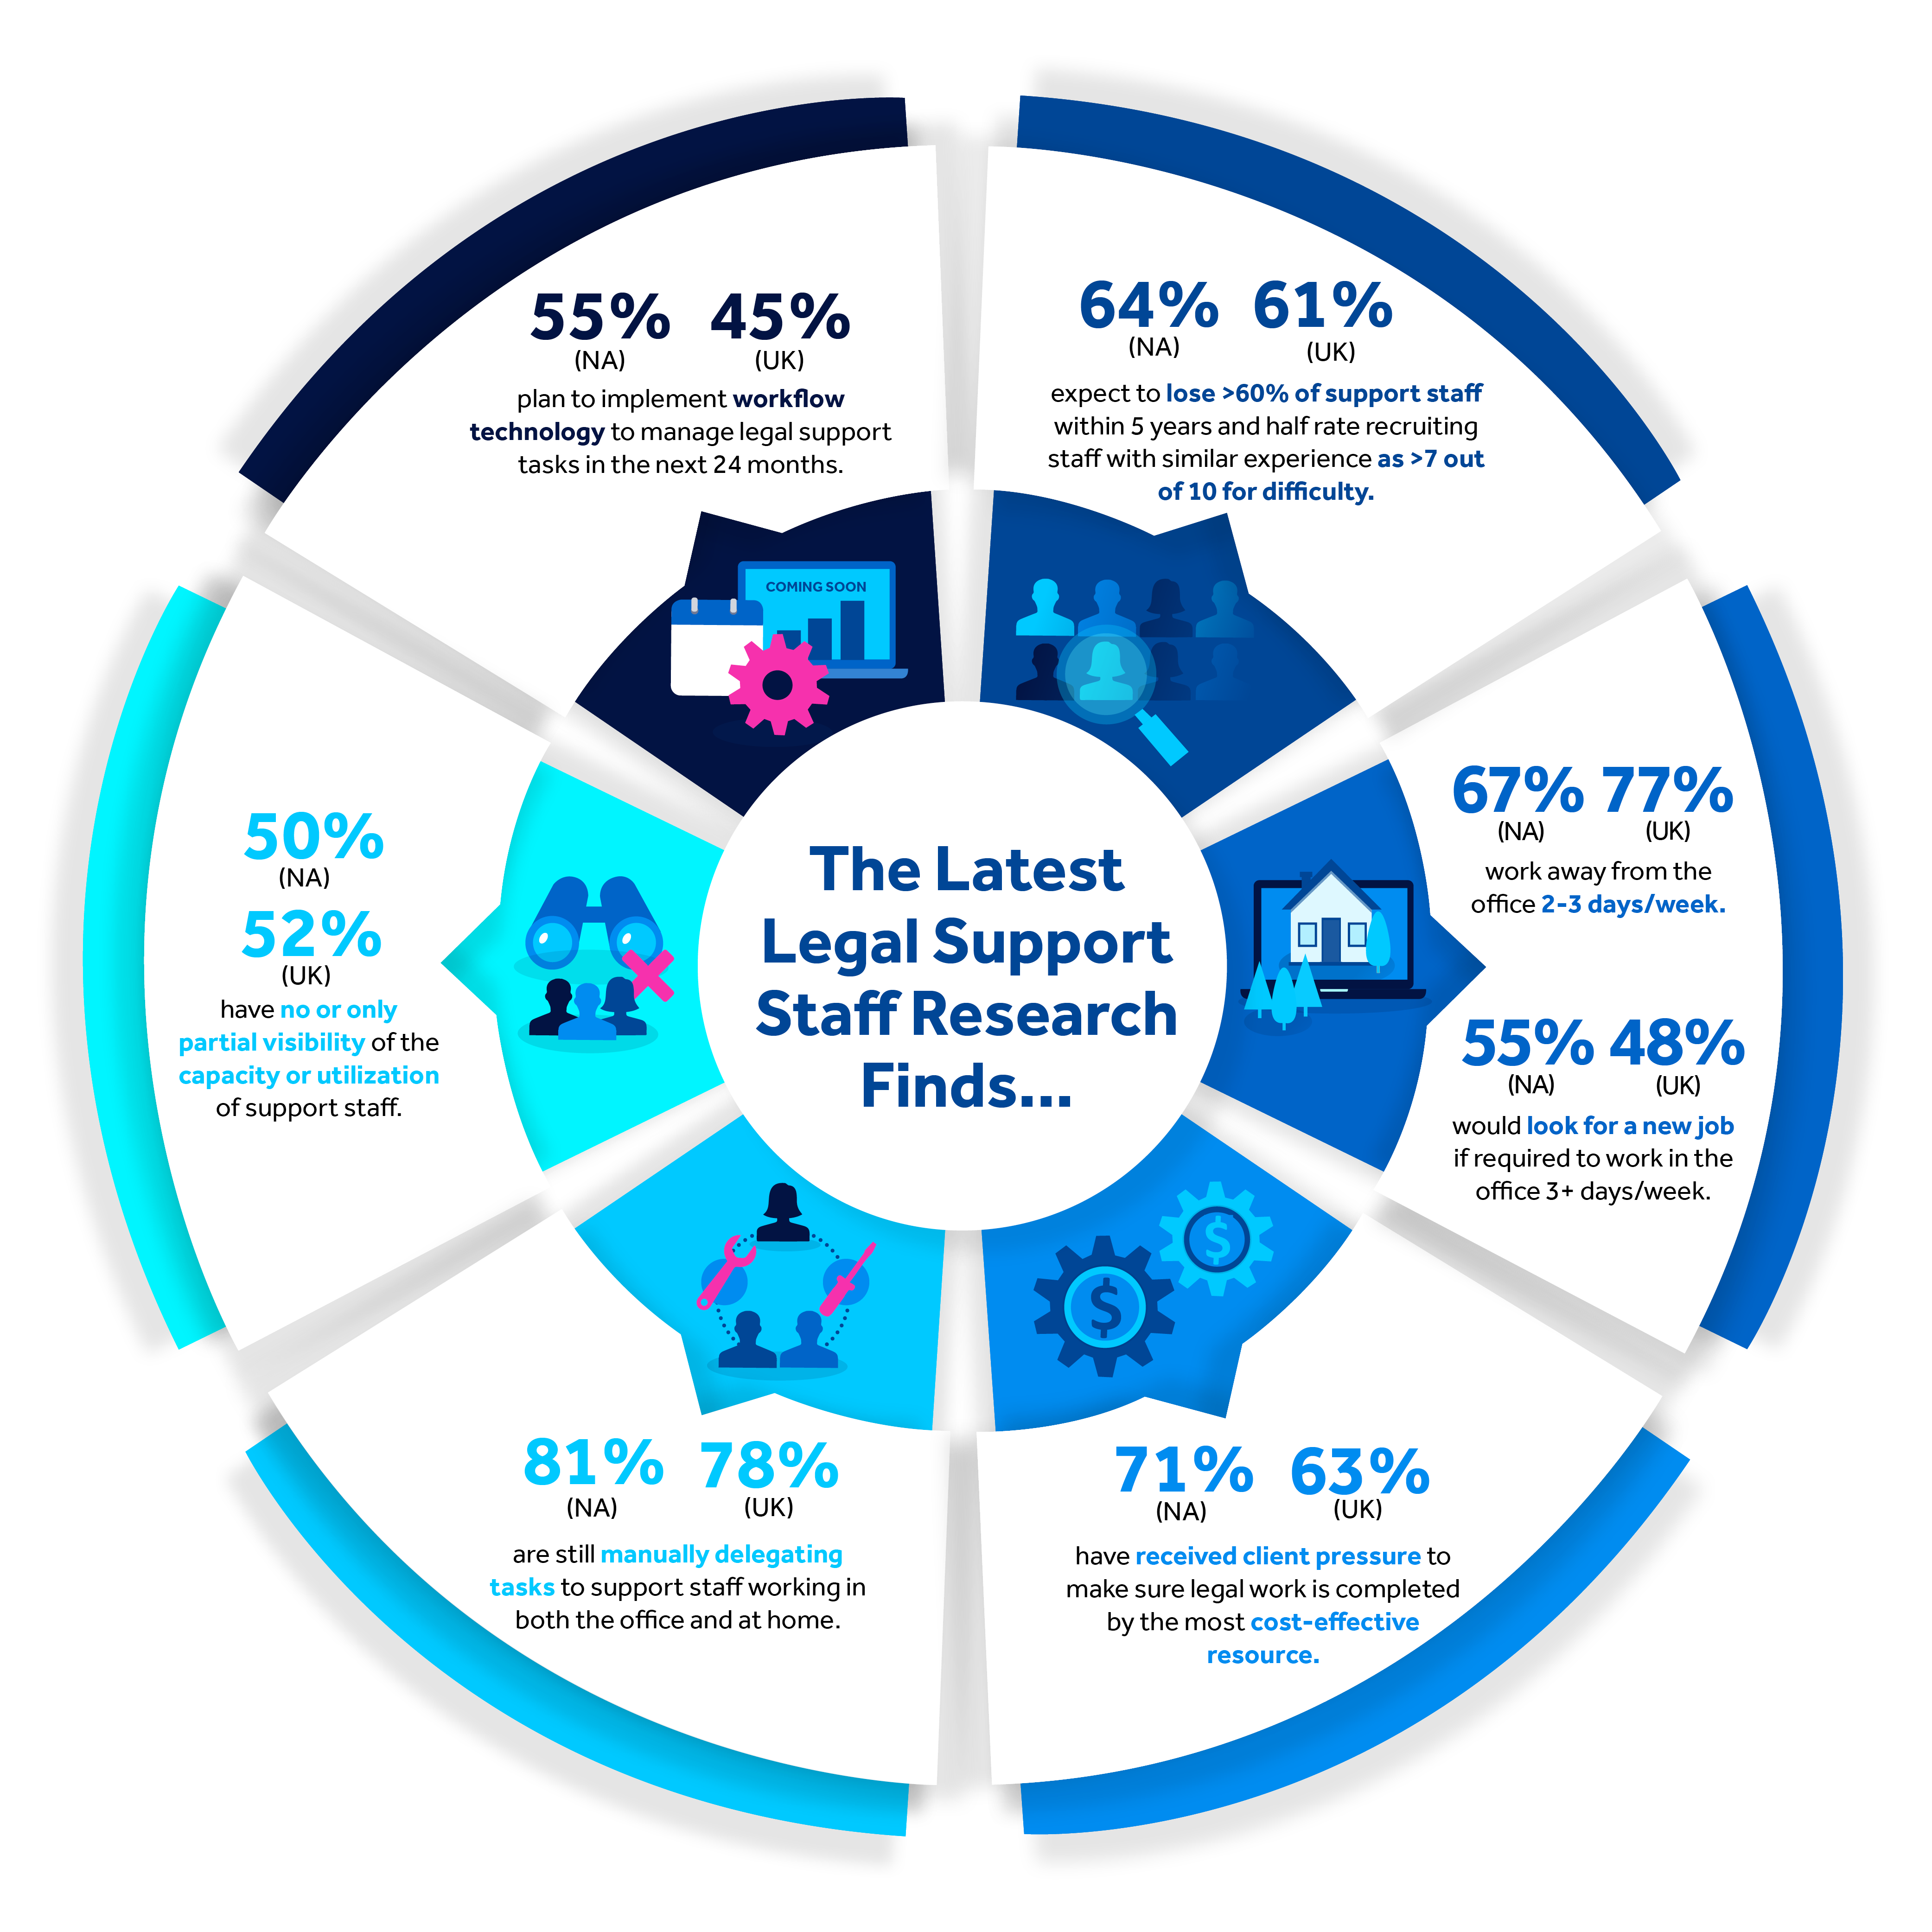 The Legal Support Staff Research finds...